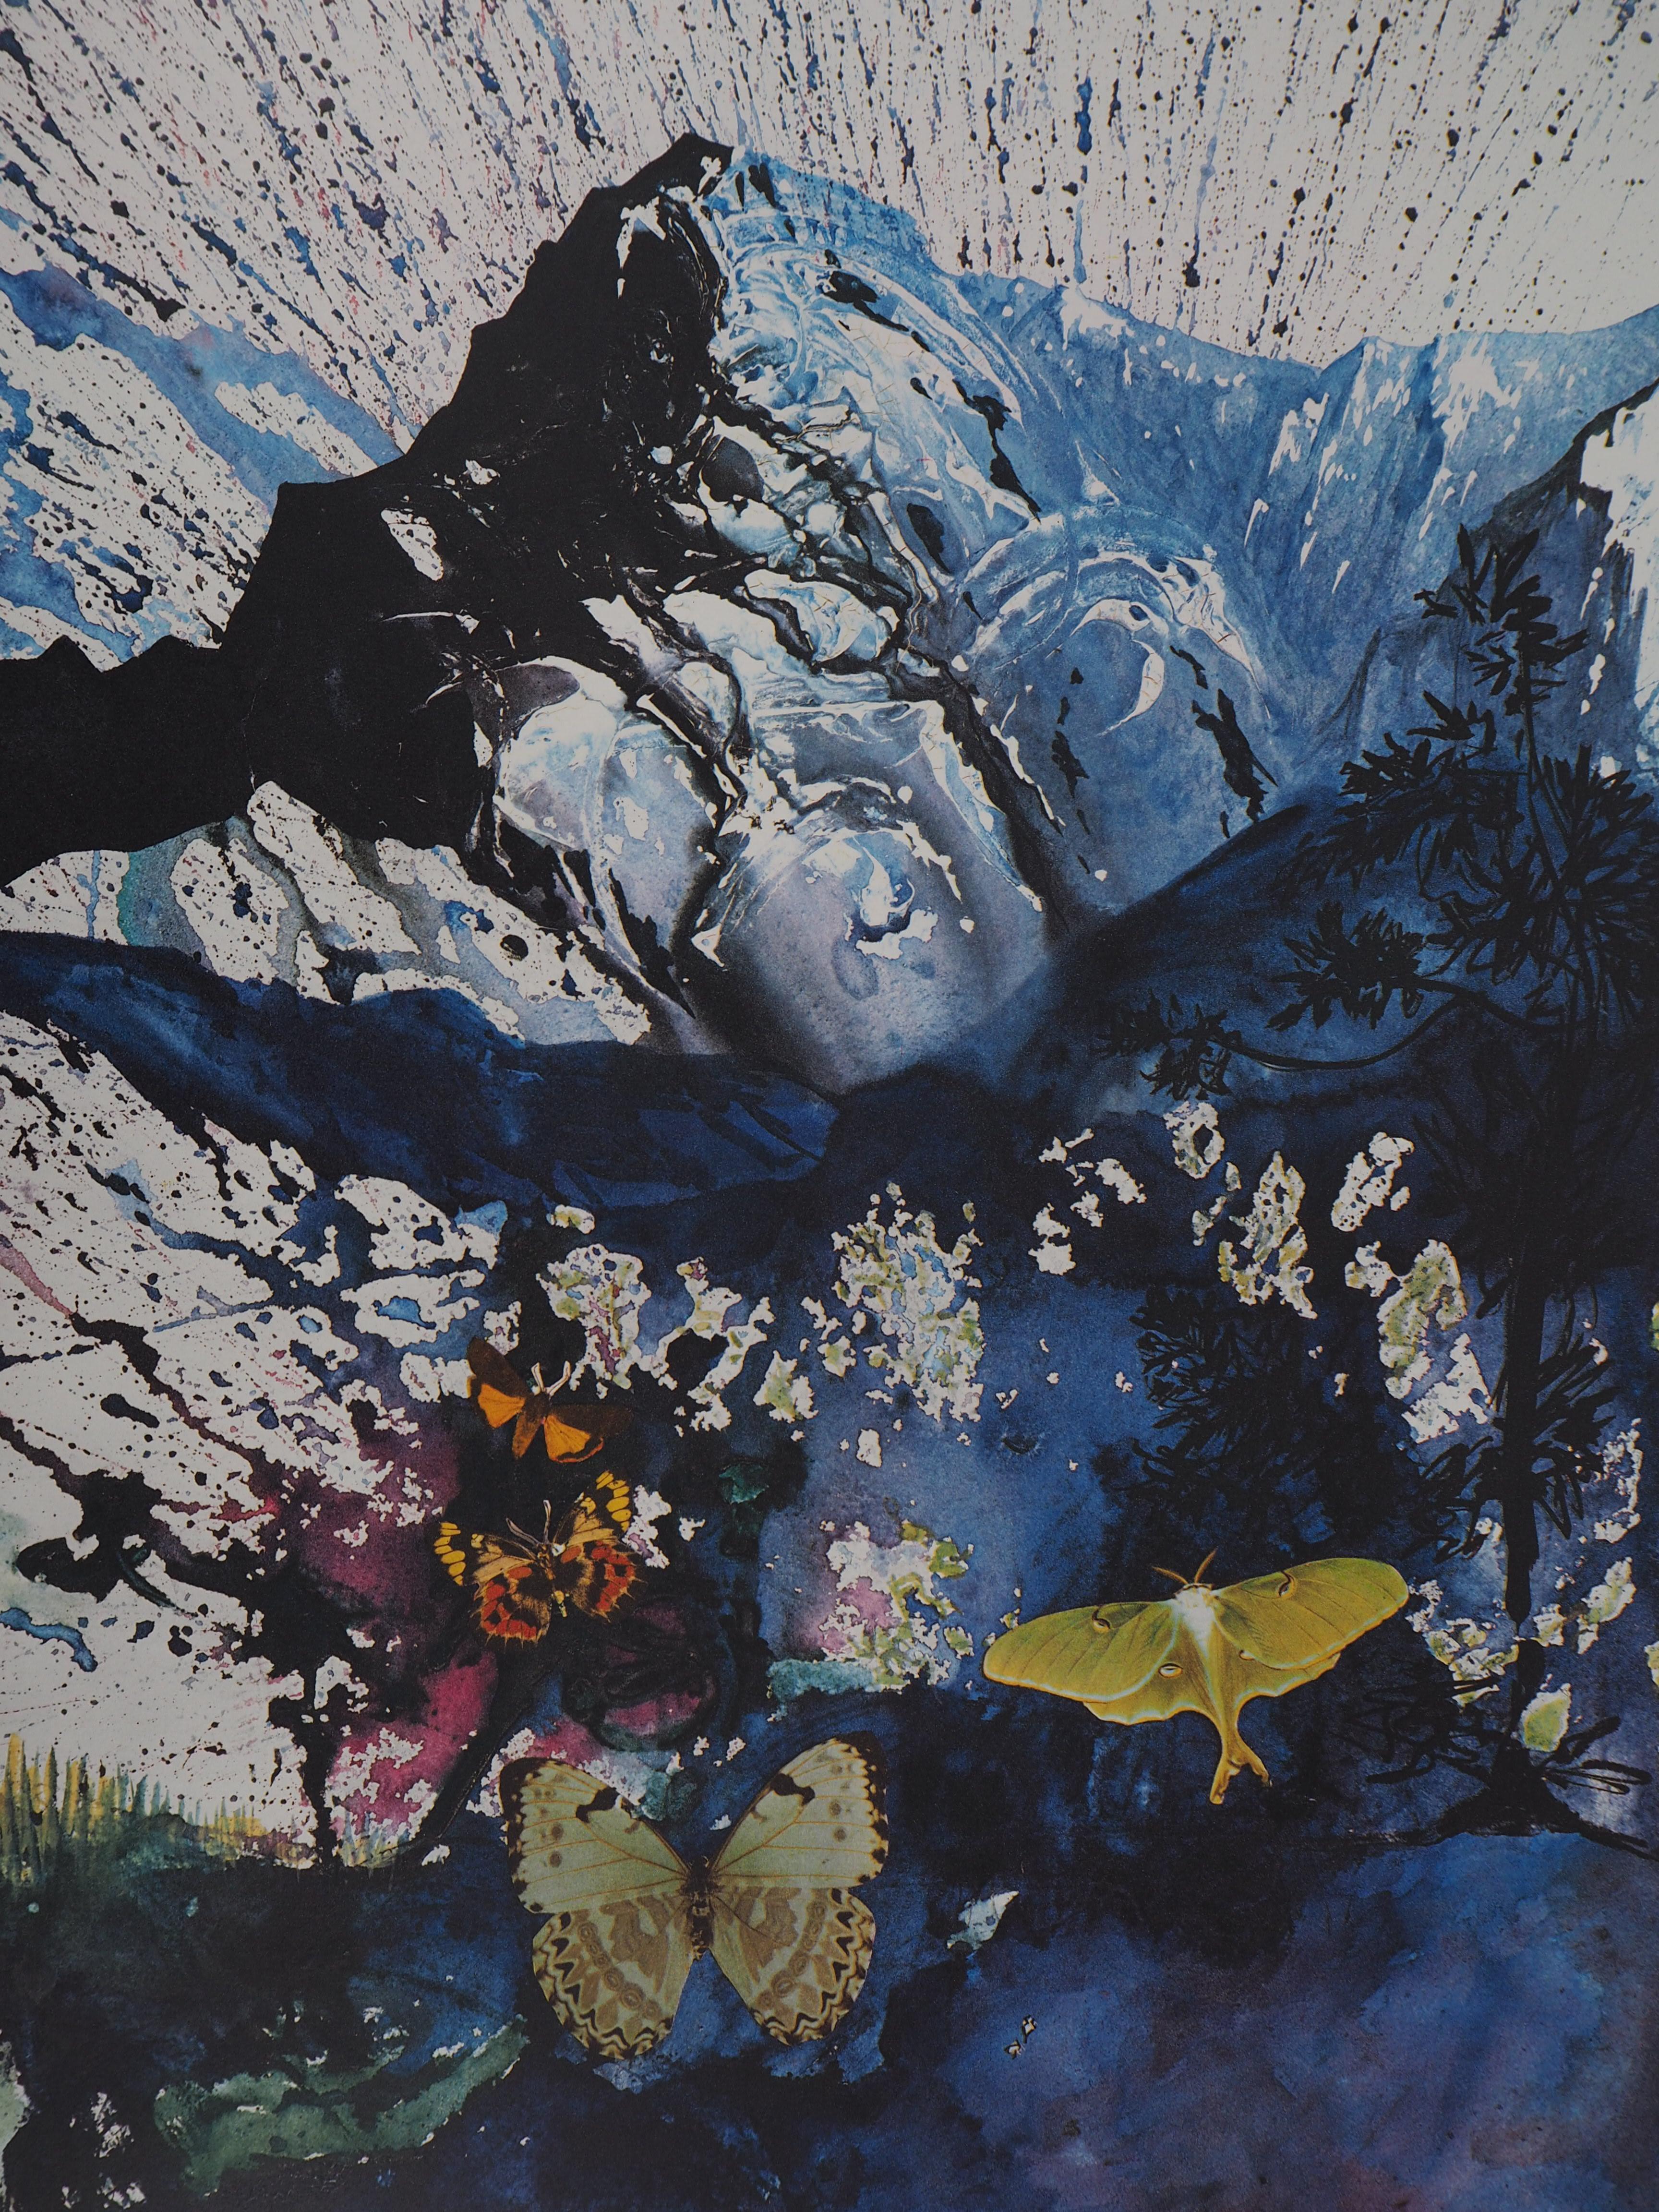 Salvador DALI (1904-1969)
Butterfly suite : Les Alpes, 1969

Heliogravure / Photogravure after original design by Dali
Blind stamp signature bottom right
Numbered / 1700 copies
Printed in Draeger workshop
On vellum 53,5 x 37 cm (c. 21 x 15